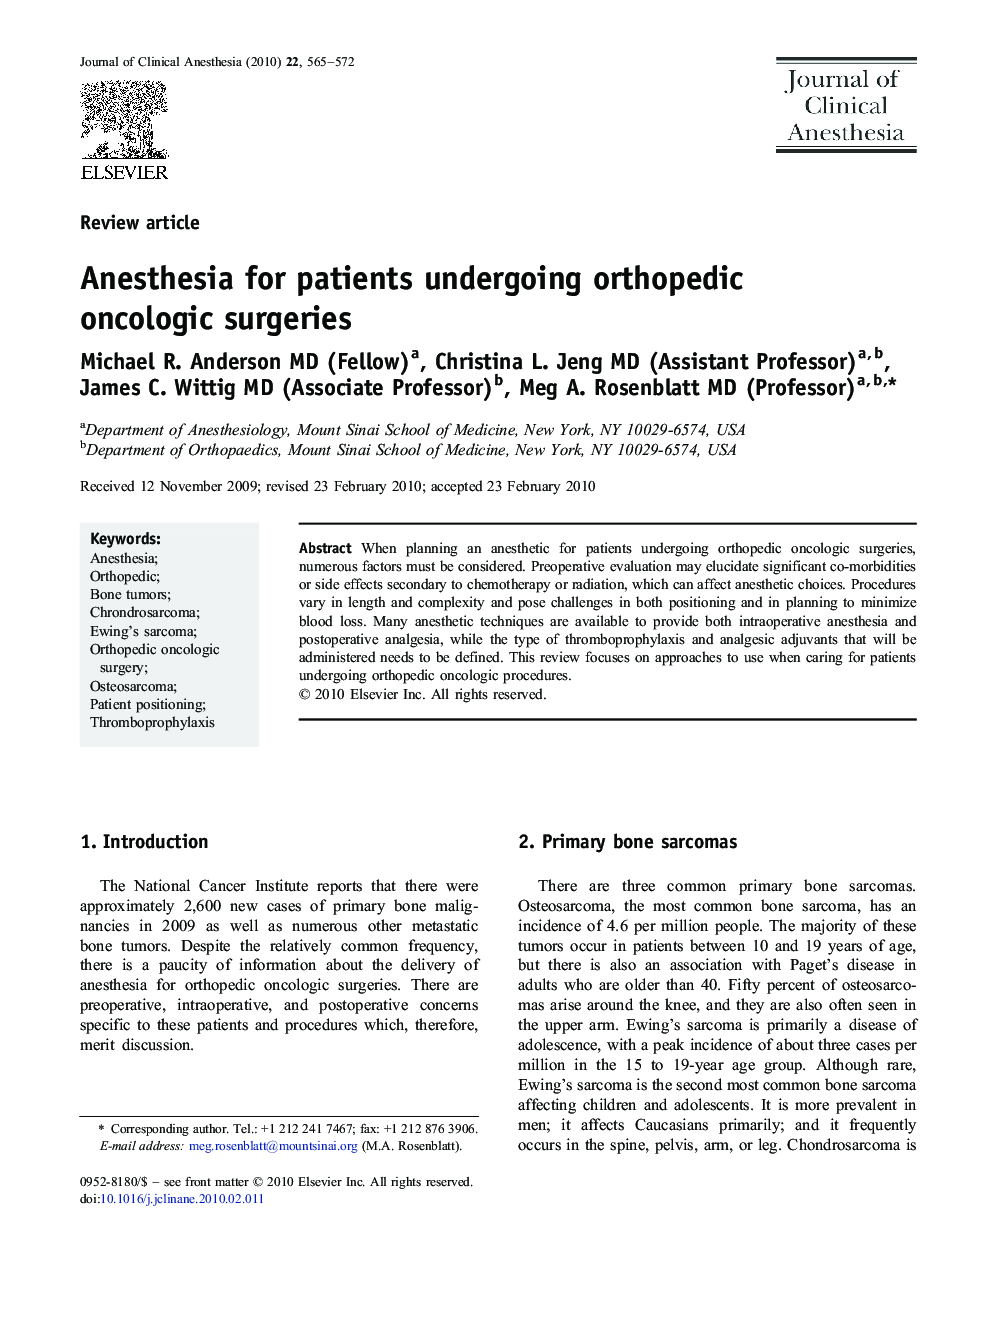 Anesthesia for patients undergoing orthopedic oncologic surgeries